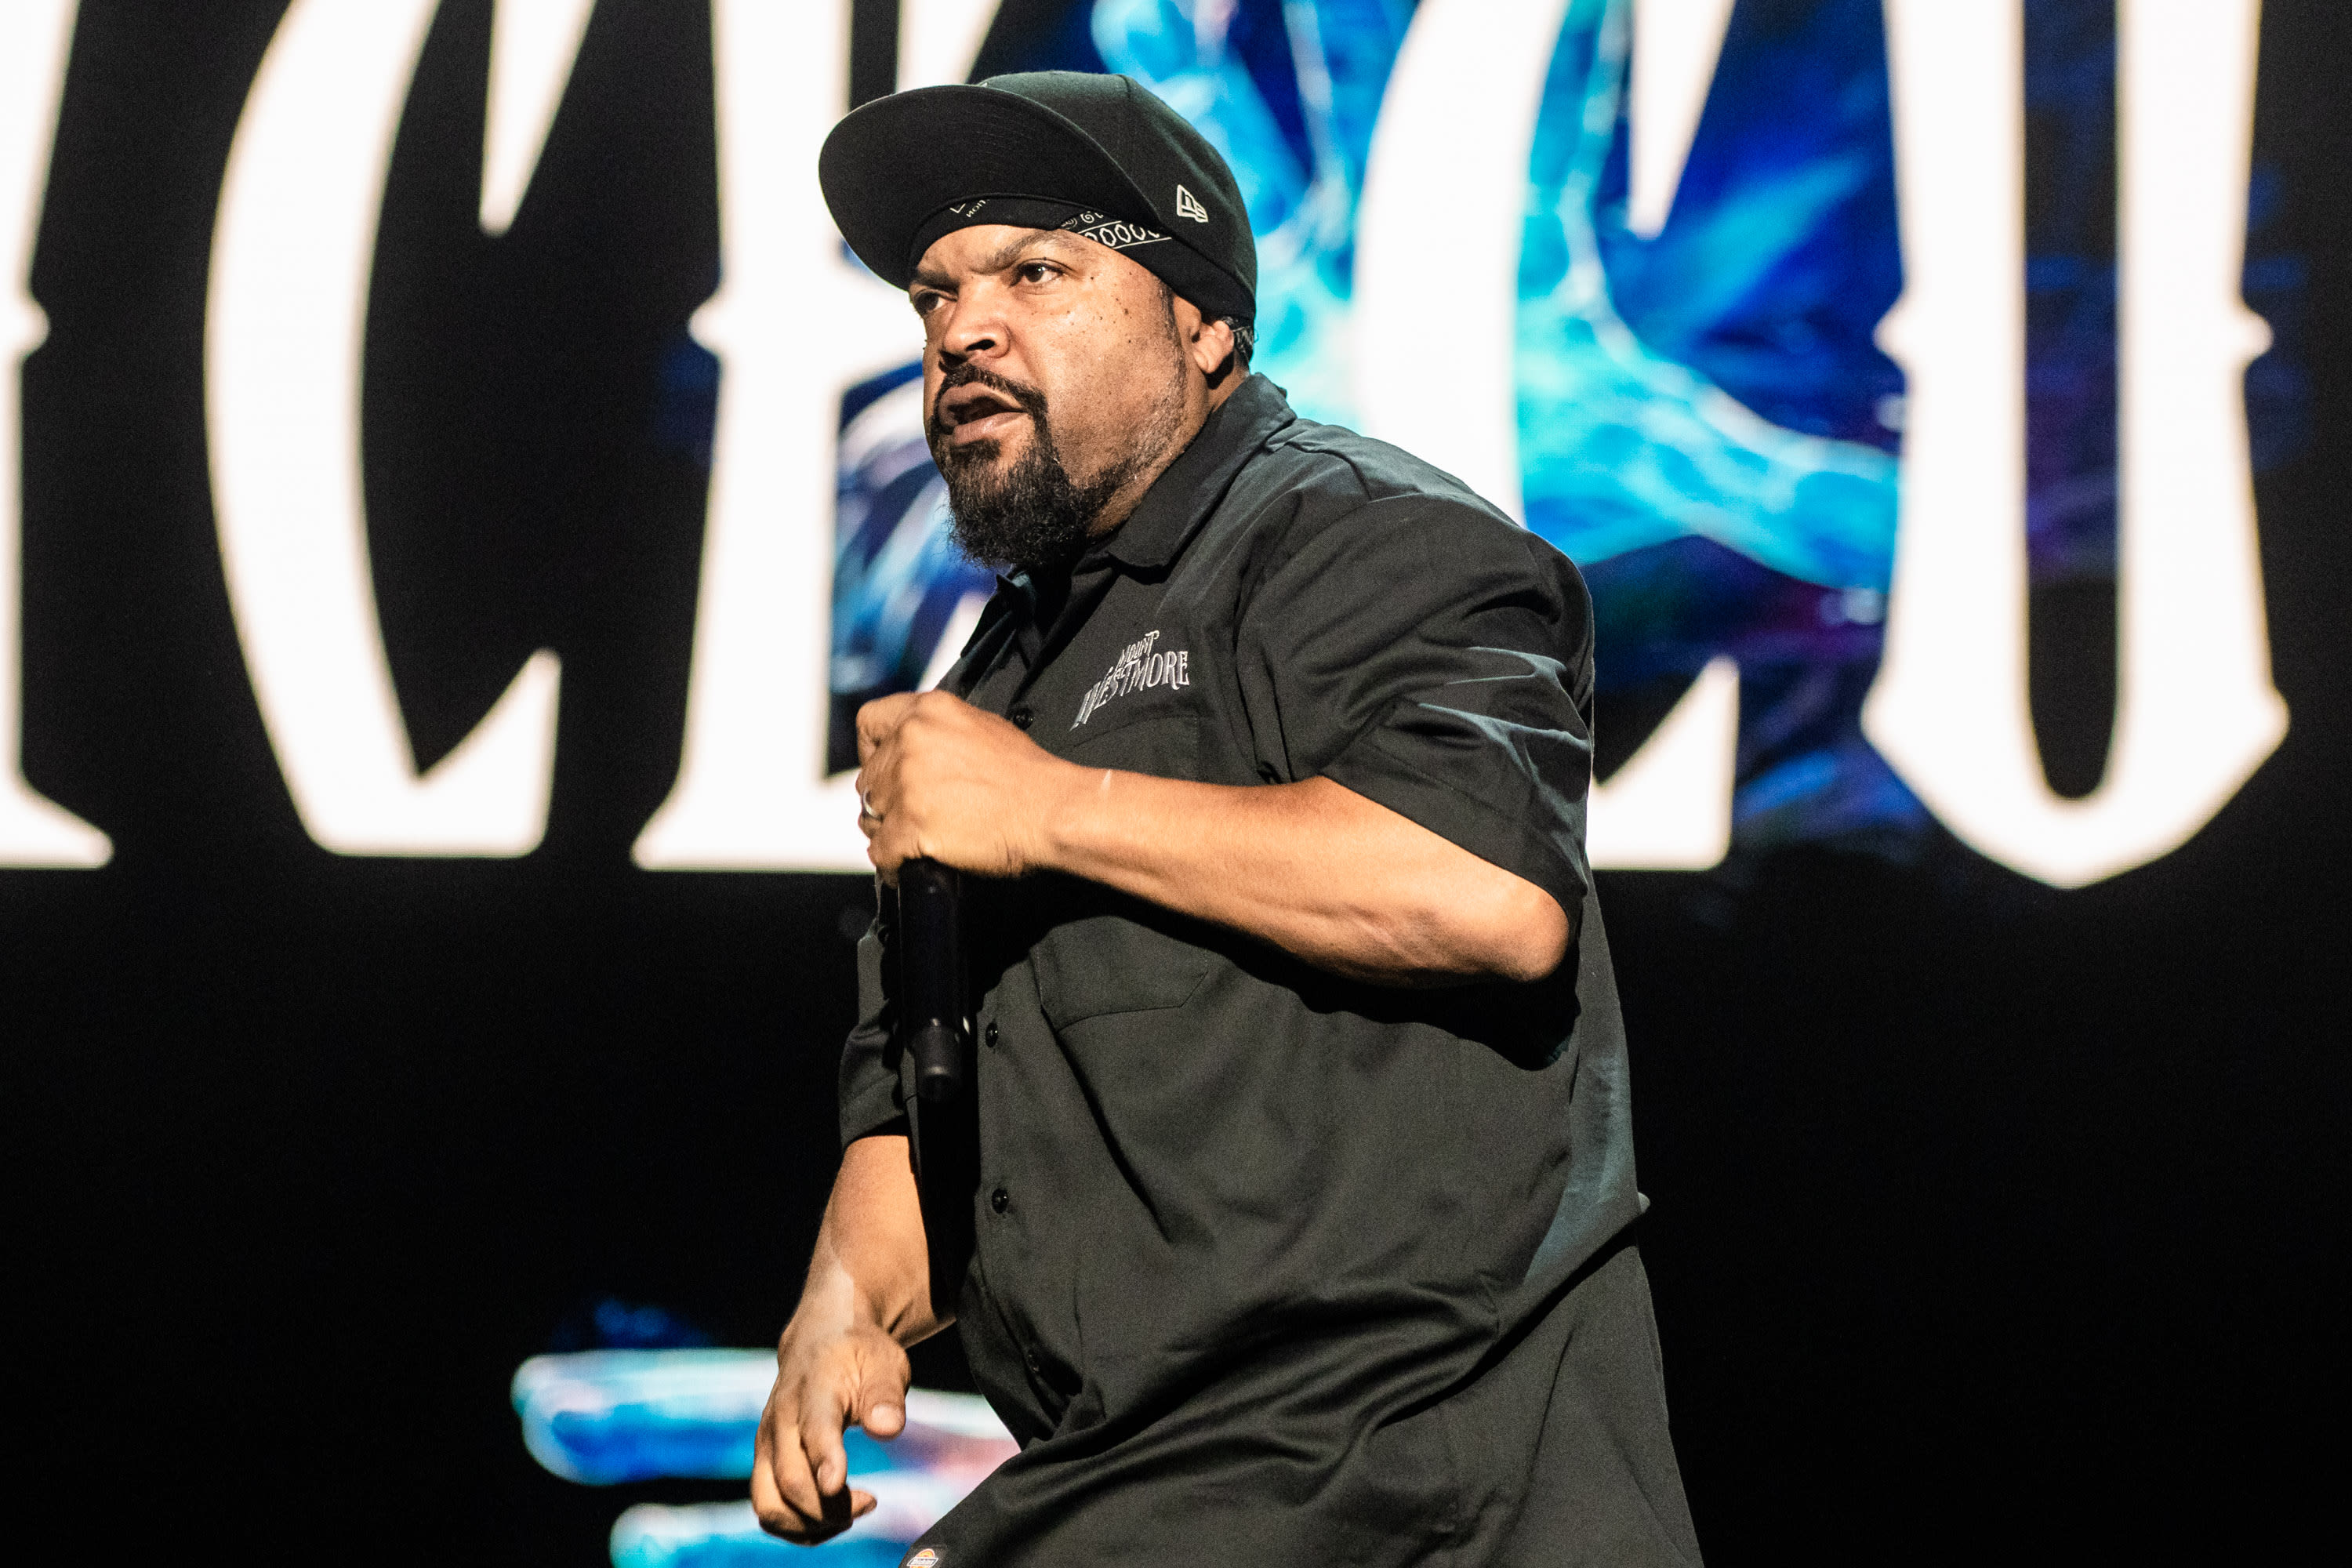 Ice Cube Lost S$12.5 Million Film Role After Refusing Covid Vaccination  